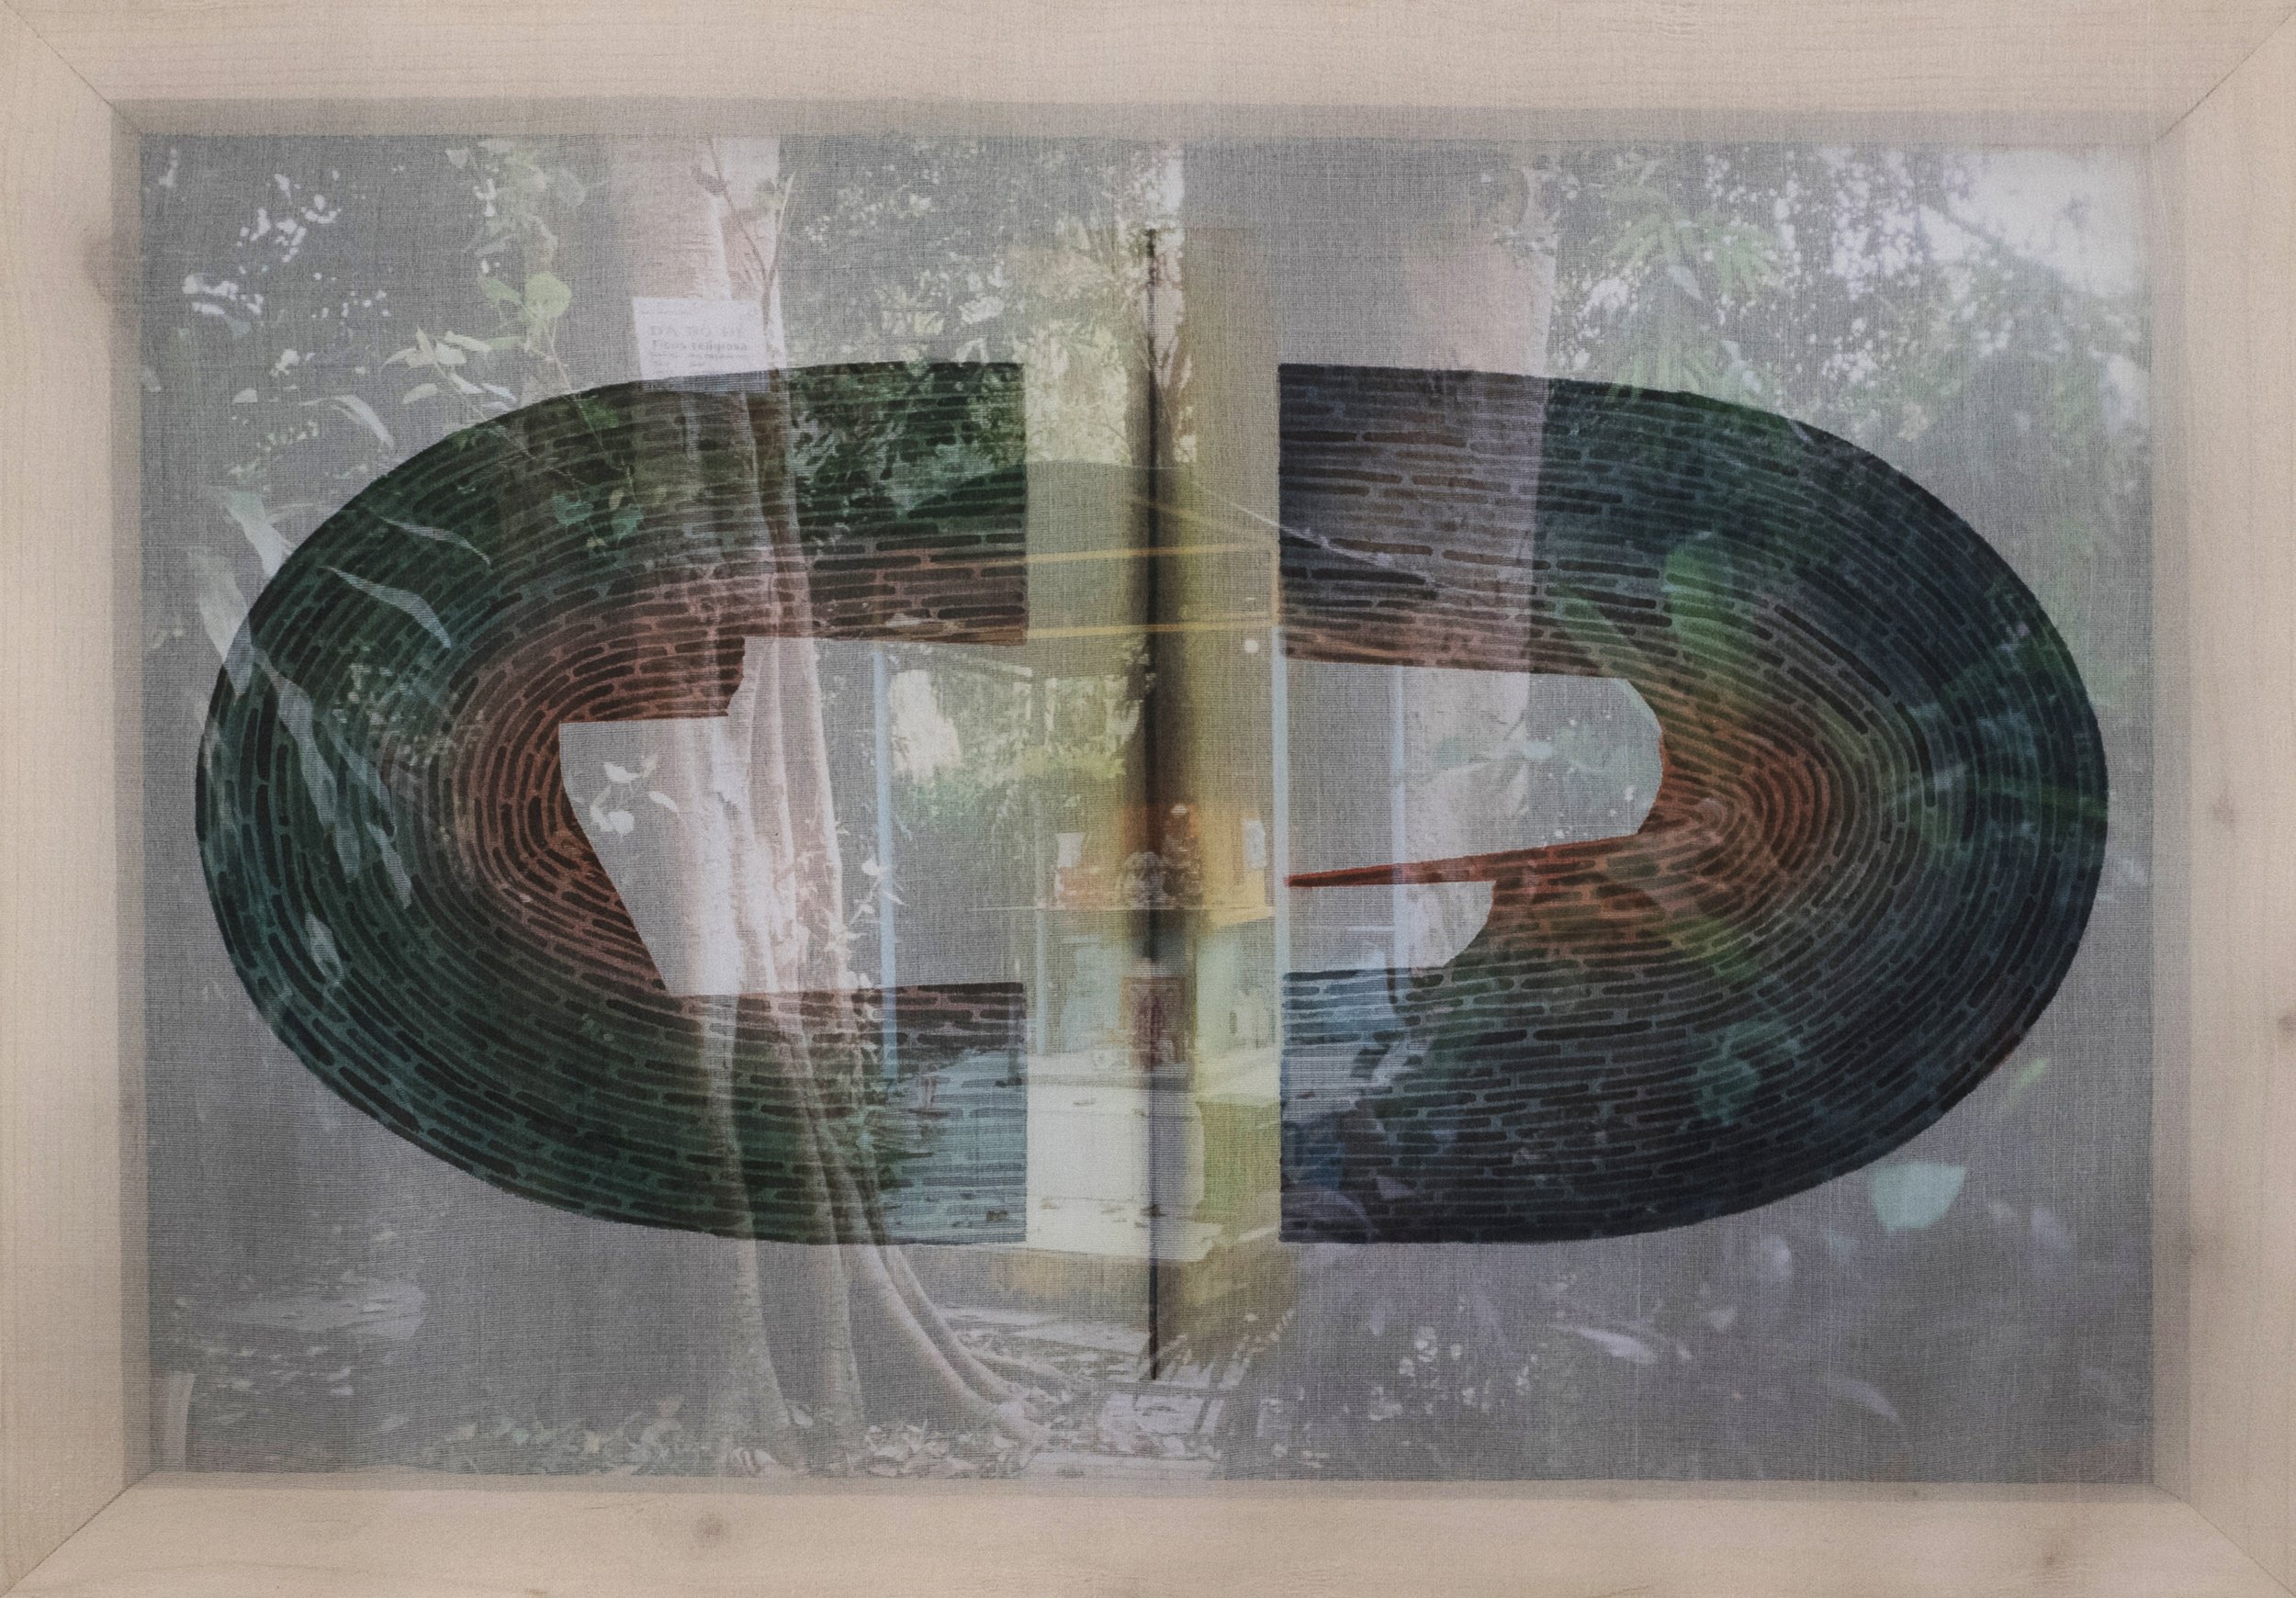    Circulations 1  . 2021. Ink and watercolor painting on silk, inkjet pigment print on archival paper.  50 x 35 x 3.5 cm   